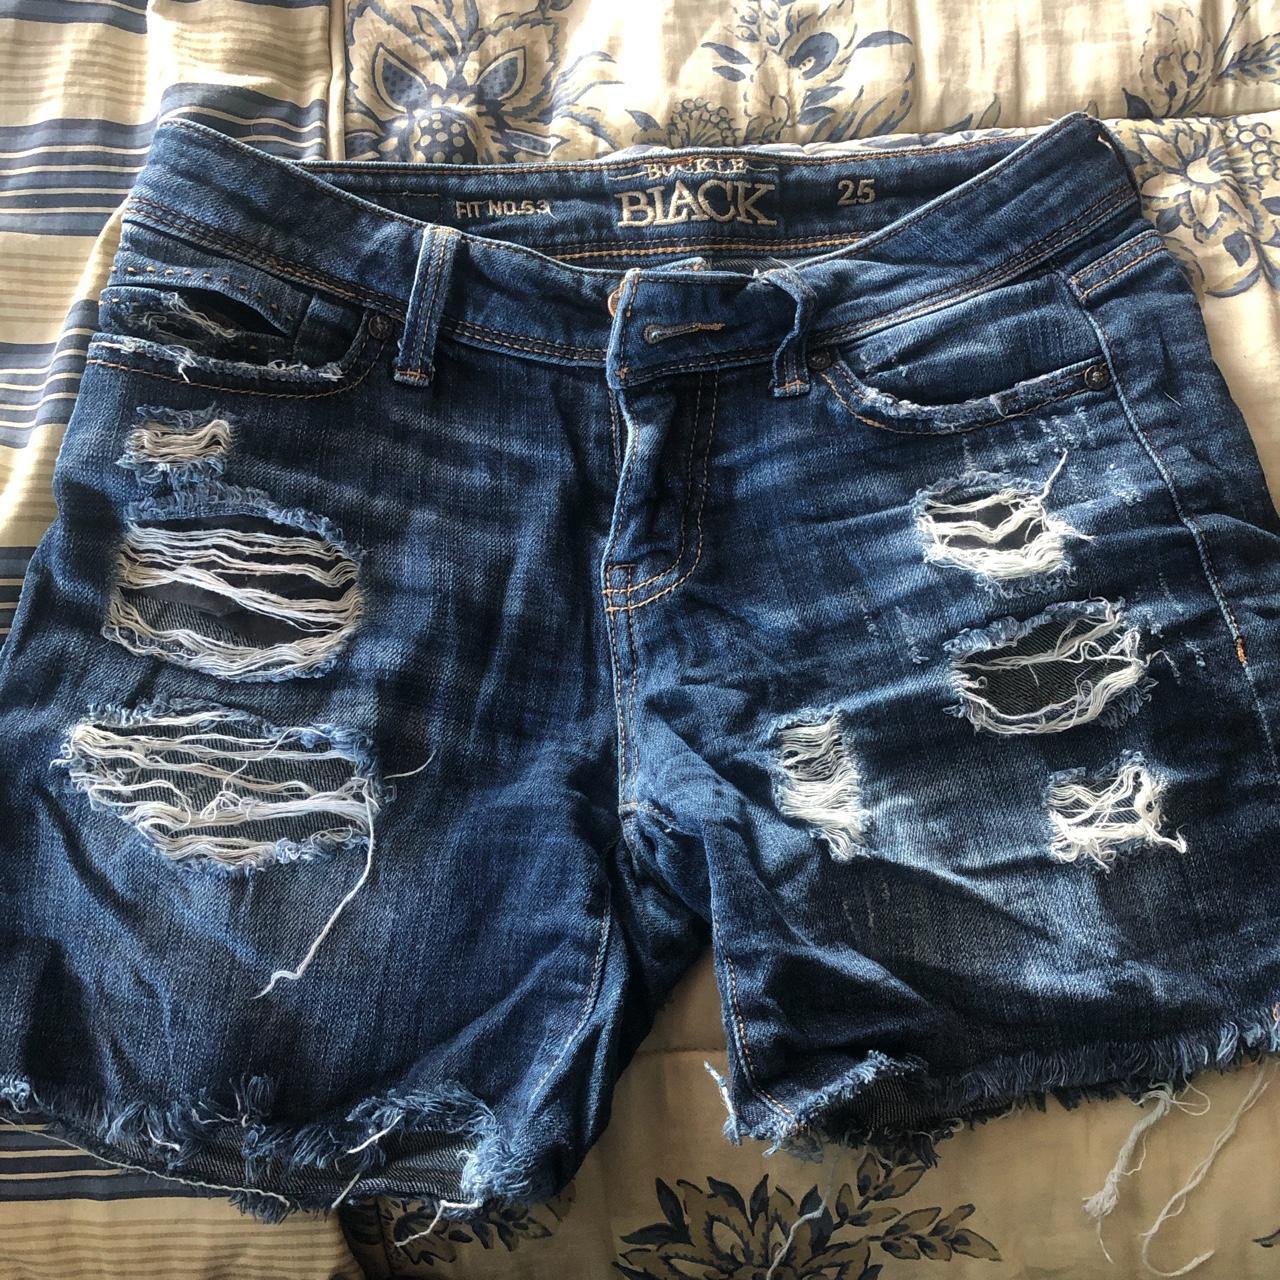 Buckle Black Women's Blue and Navy Shorts (3)